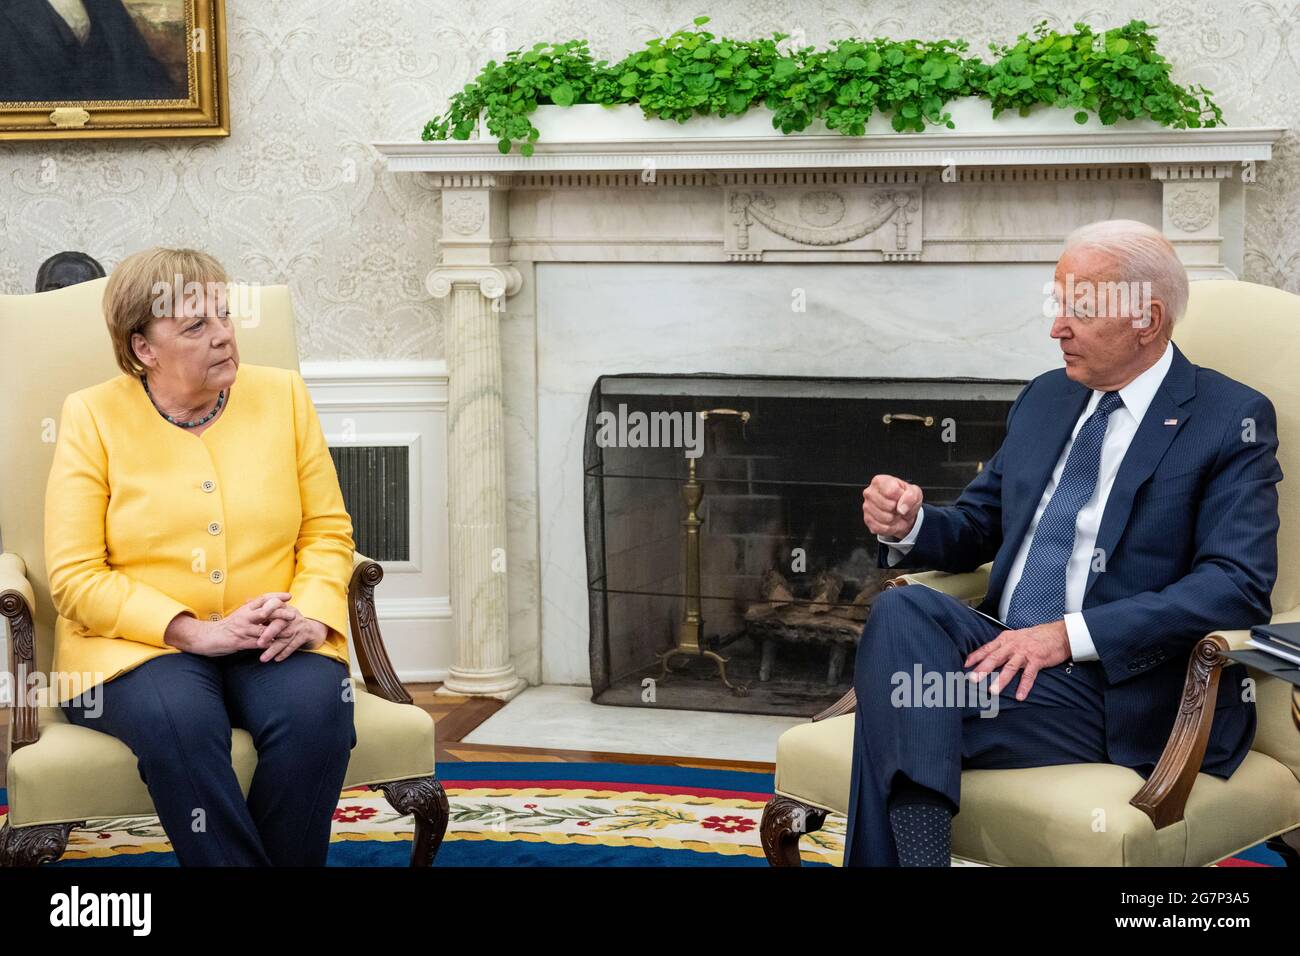 United States President Joe Biden, left, meets Chancellor Dr. Angela Merkel of Germany on the Oval Office of the White House in Washington, DC on Thursday, July 15, 2021. Credit: Doug Mills/Pool via CNP /MediaPunch Stock Photo